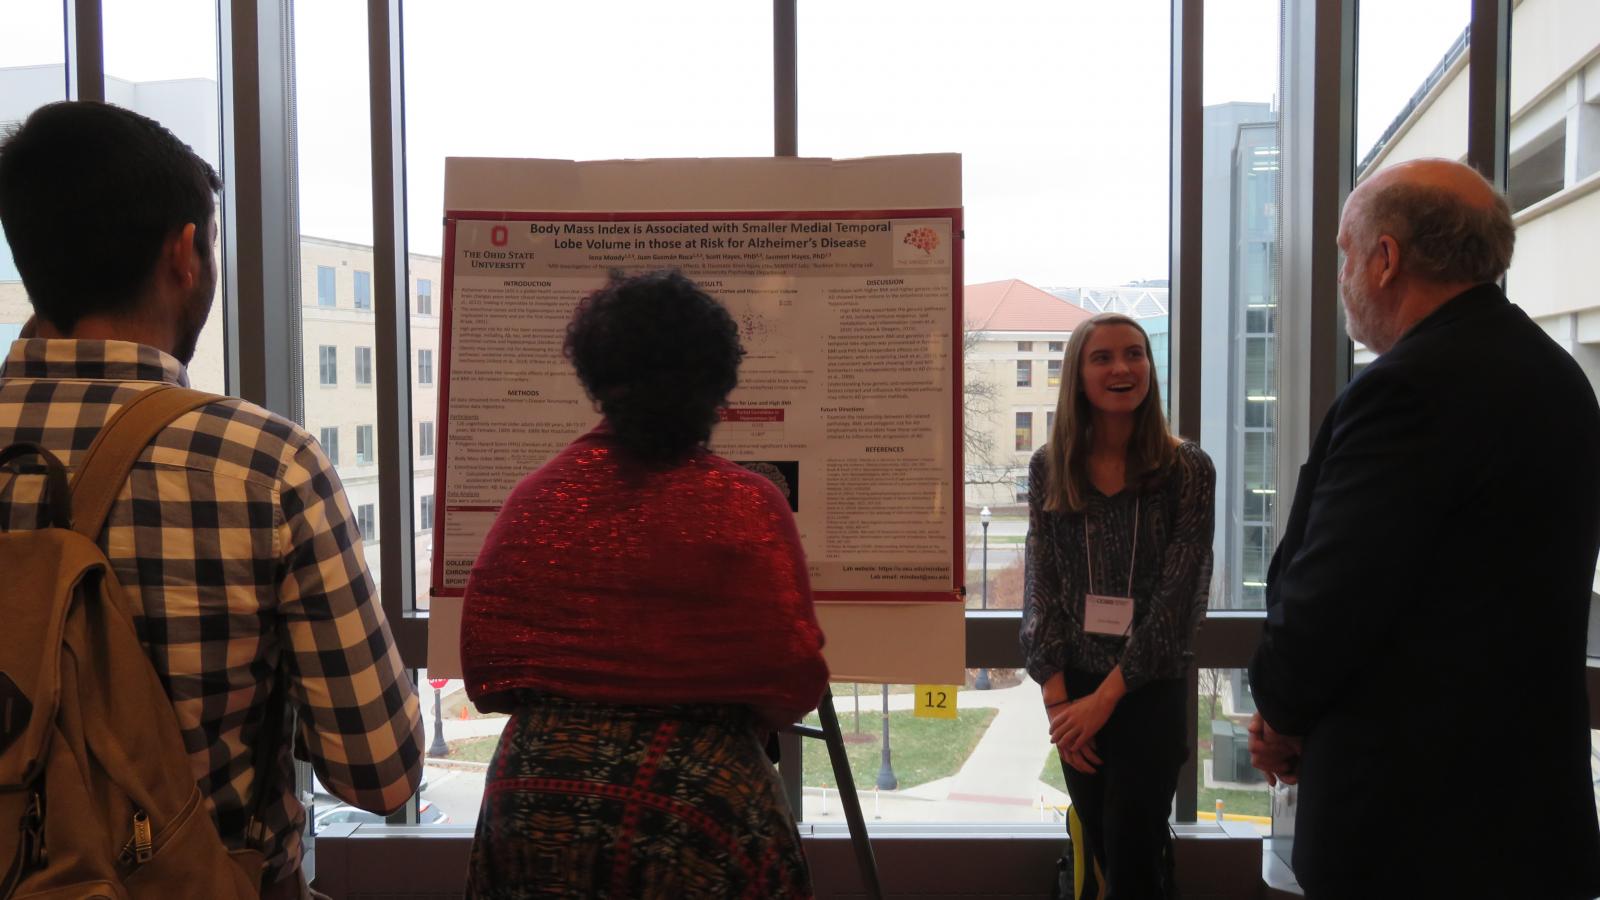 Jena Moody presents her research at the Poster Session